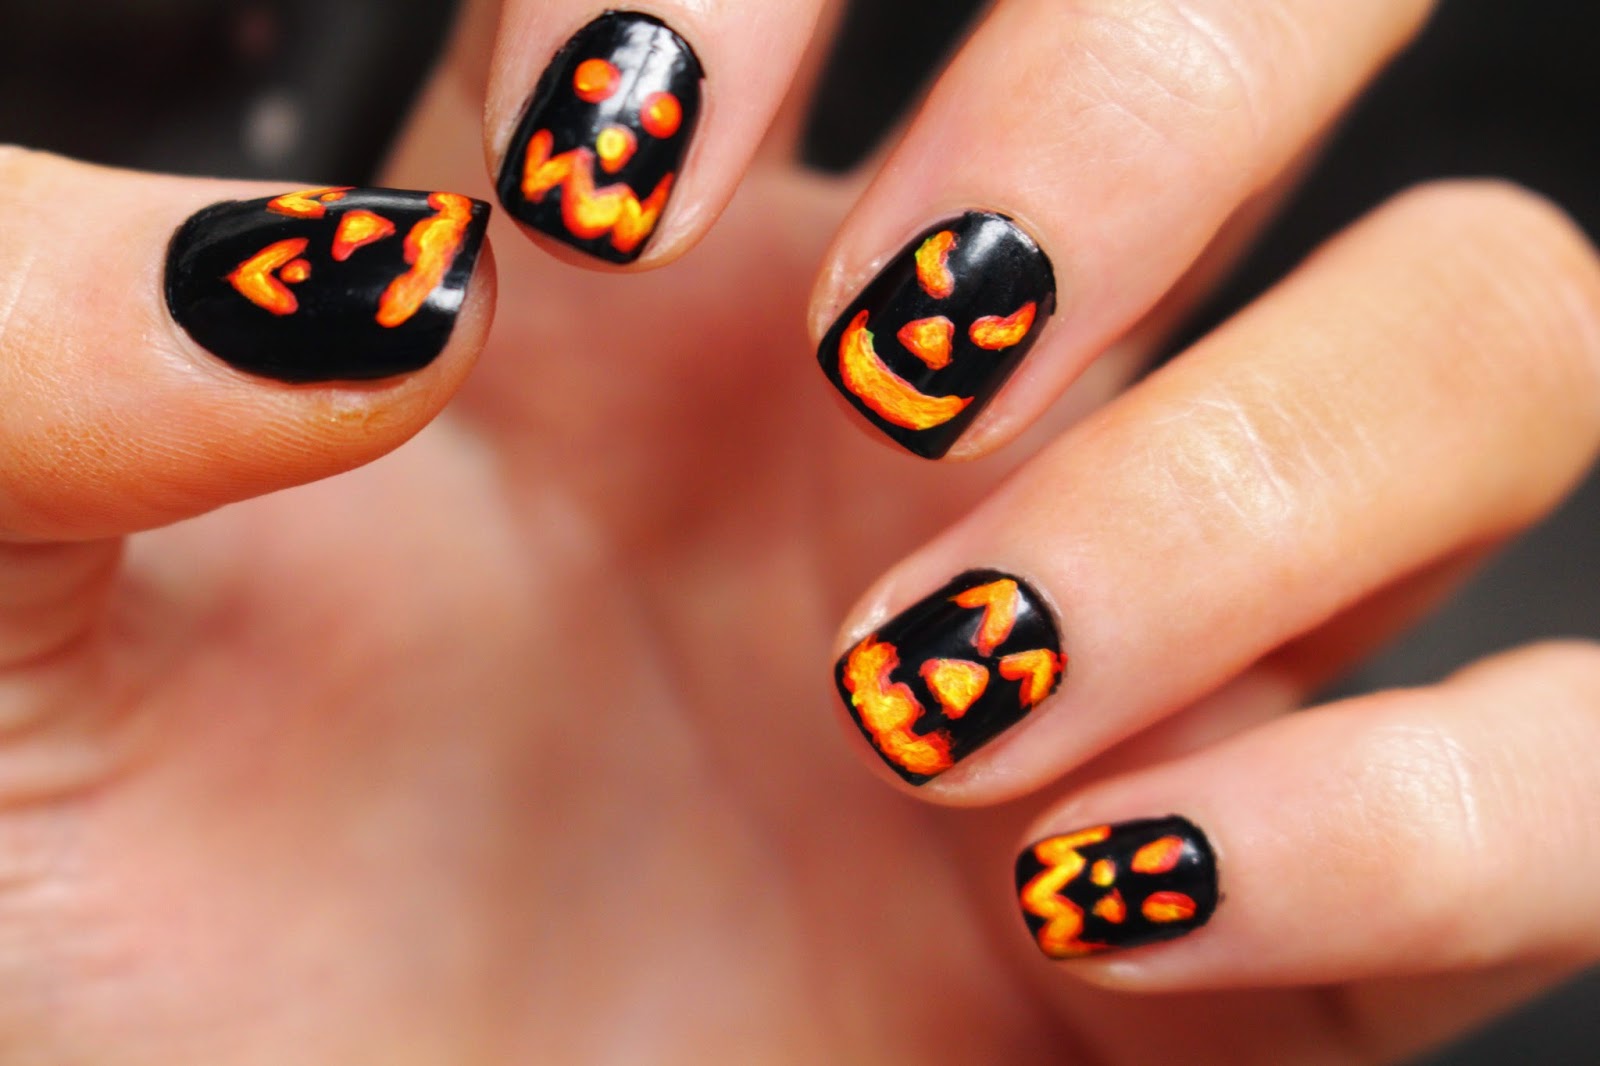 8. "Jack O Lantern Nail Design with Spider Web Accent" - wide 9